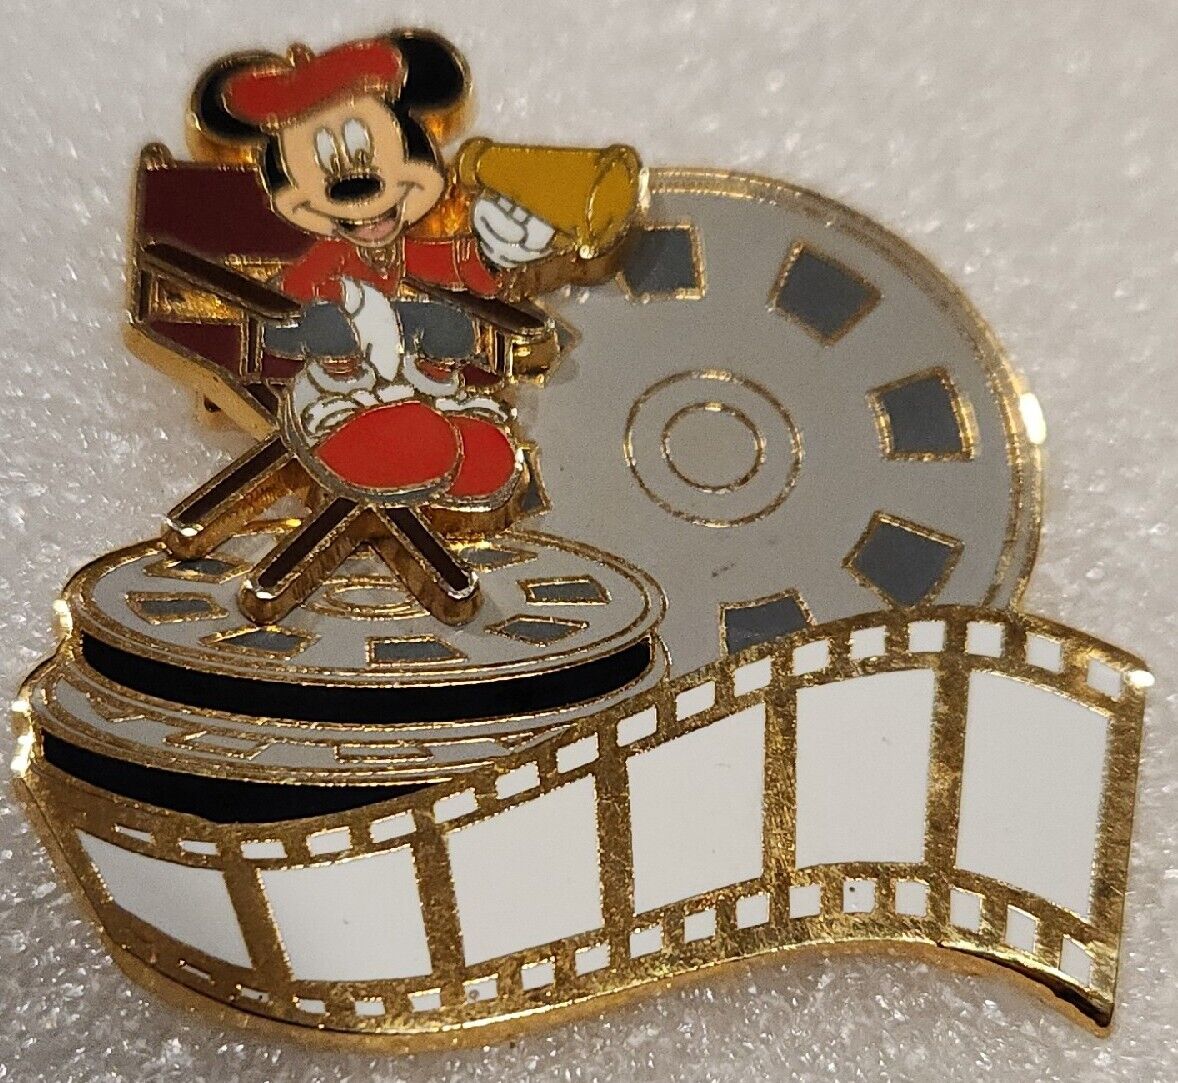 Disney Pin 00009 MICKEY DIRECTOR Unmarked PP Preproduction Sample Proof LE 3